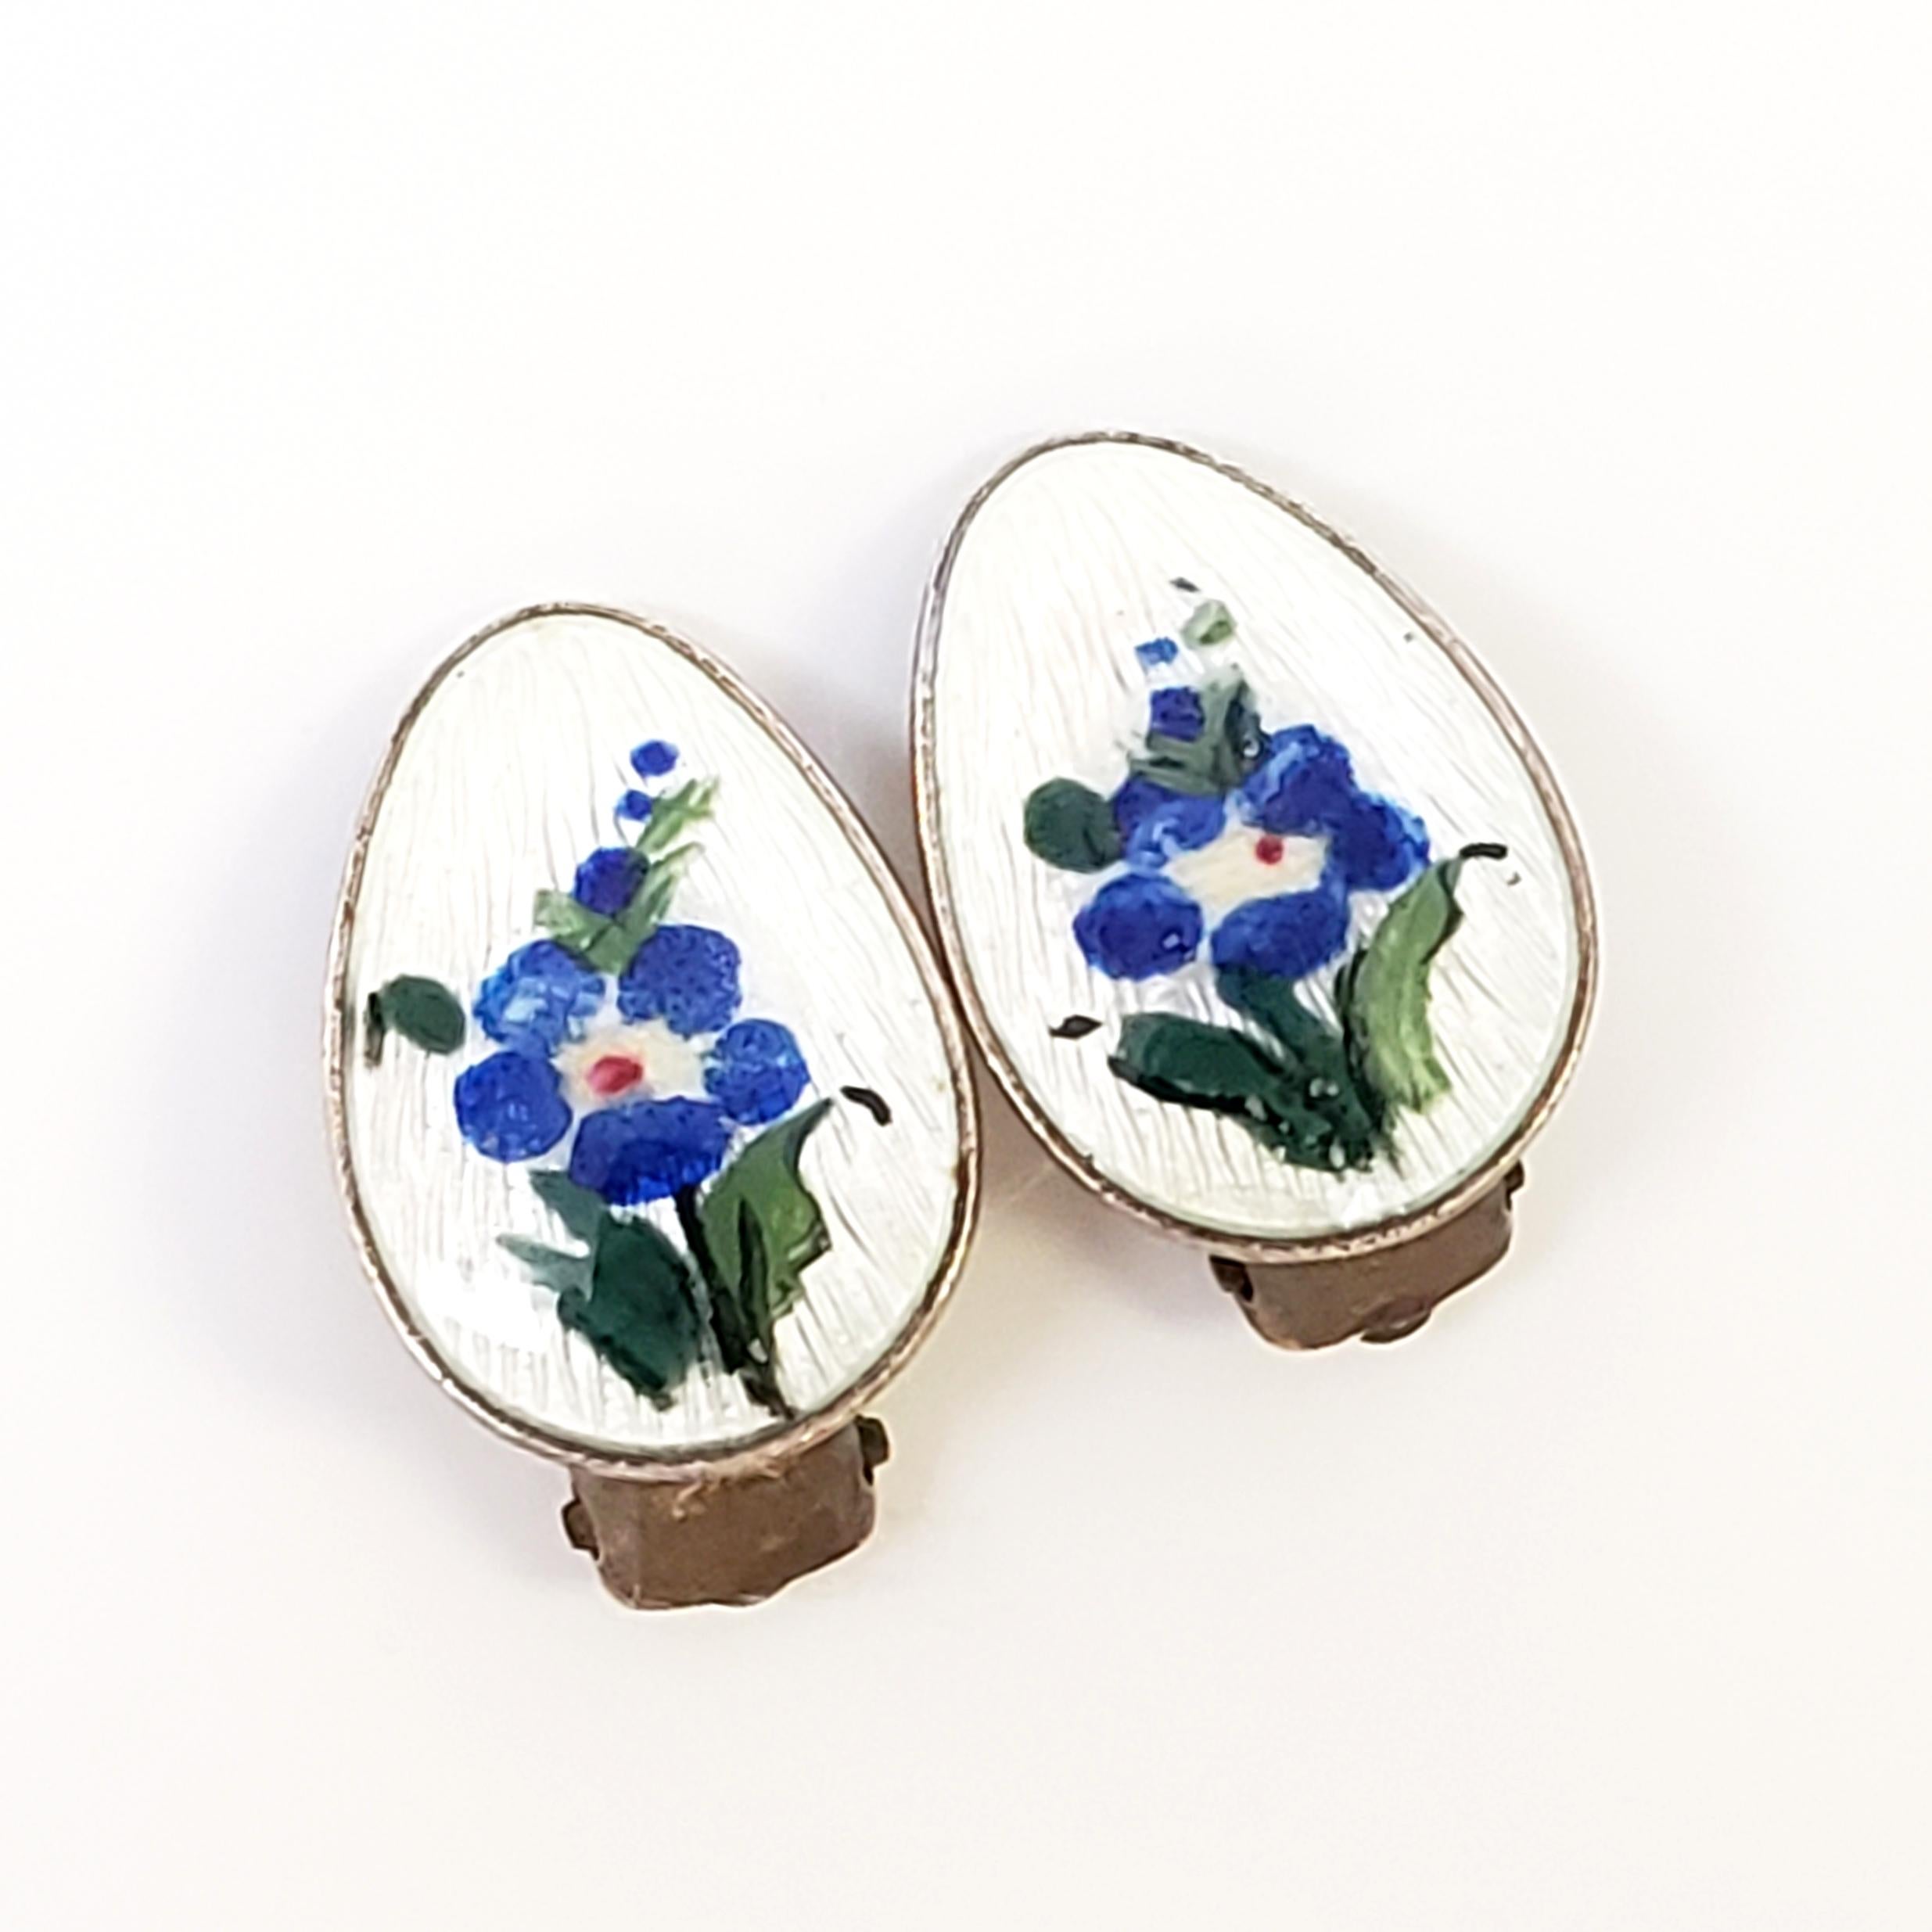 Vintage gold vermeil over sterling silver white guilloche enamel flower clip-on earrings by Ivar T Holth.

Beautifully hand painted flowers on white guilloche enamel with a gold wash and clip-on backing. It is a beautiful example of Ivar Holth's